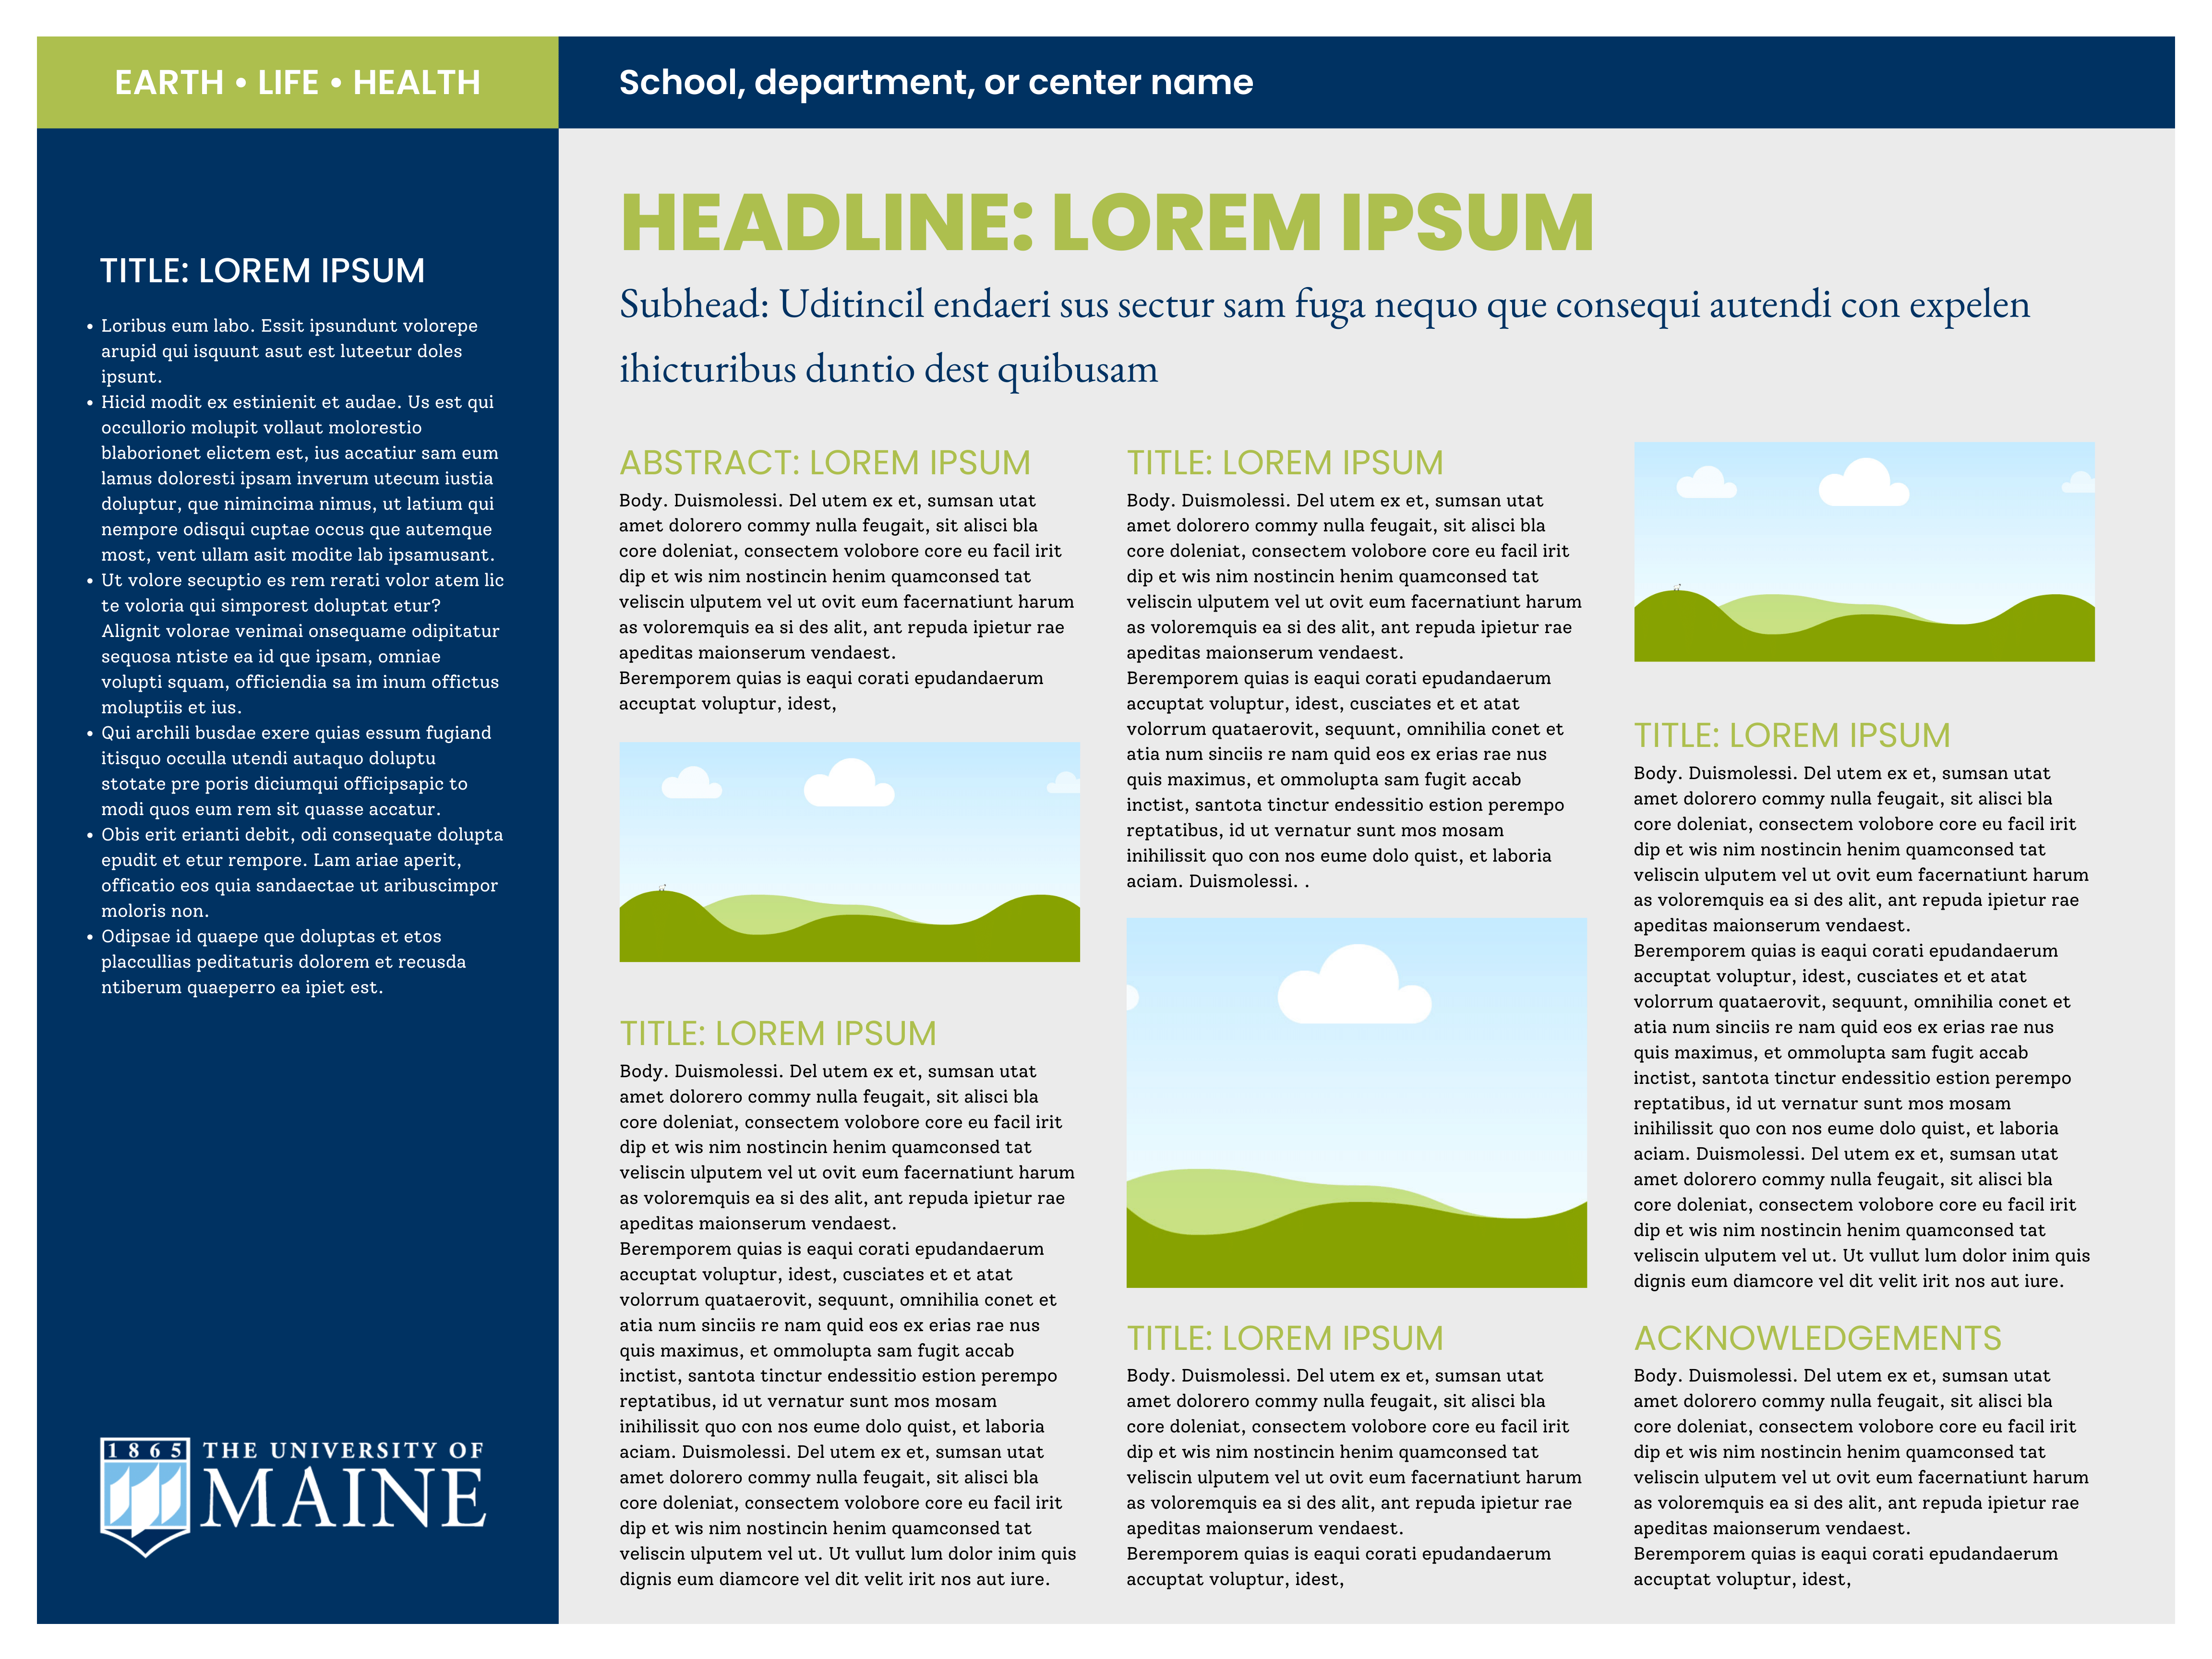 A research poster template with four columns and in a blue and green color palette.